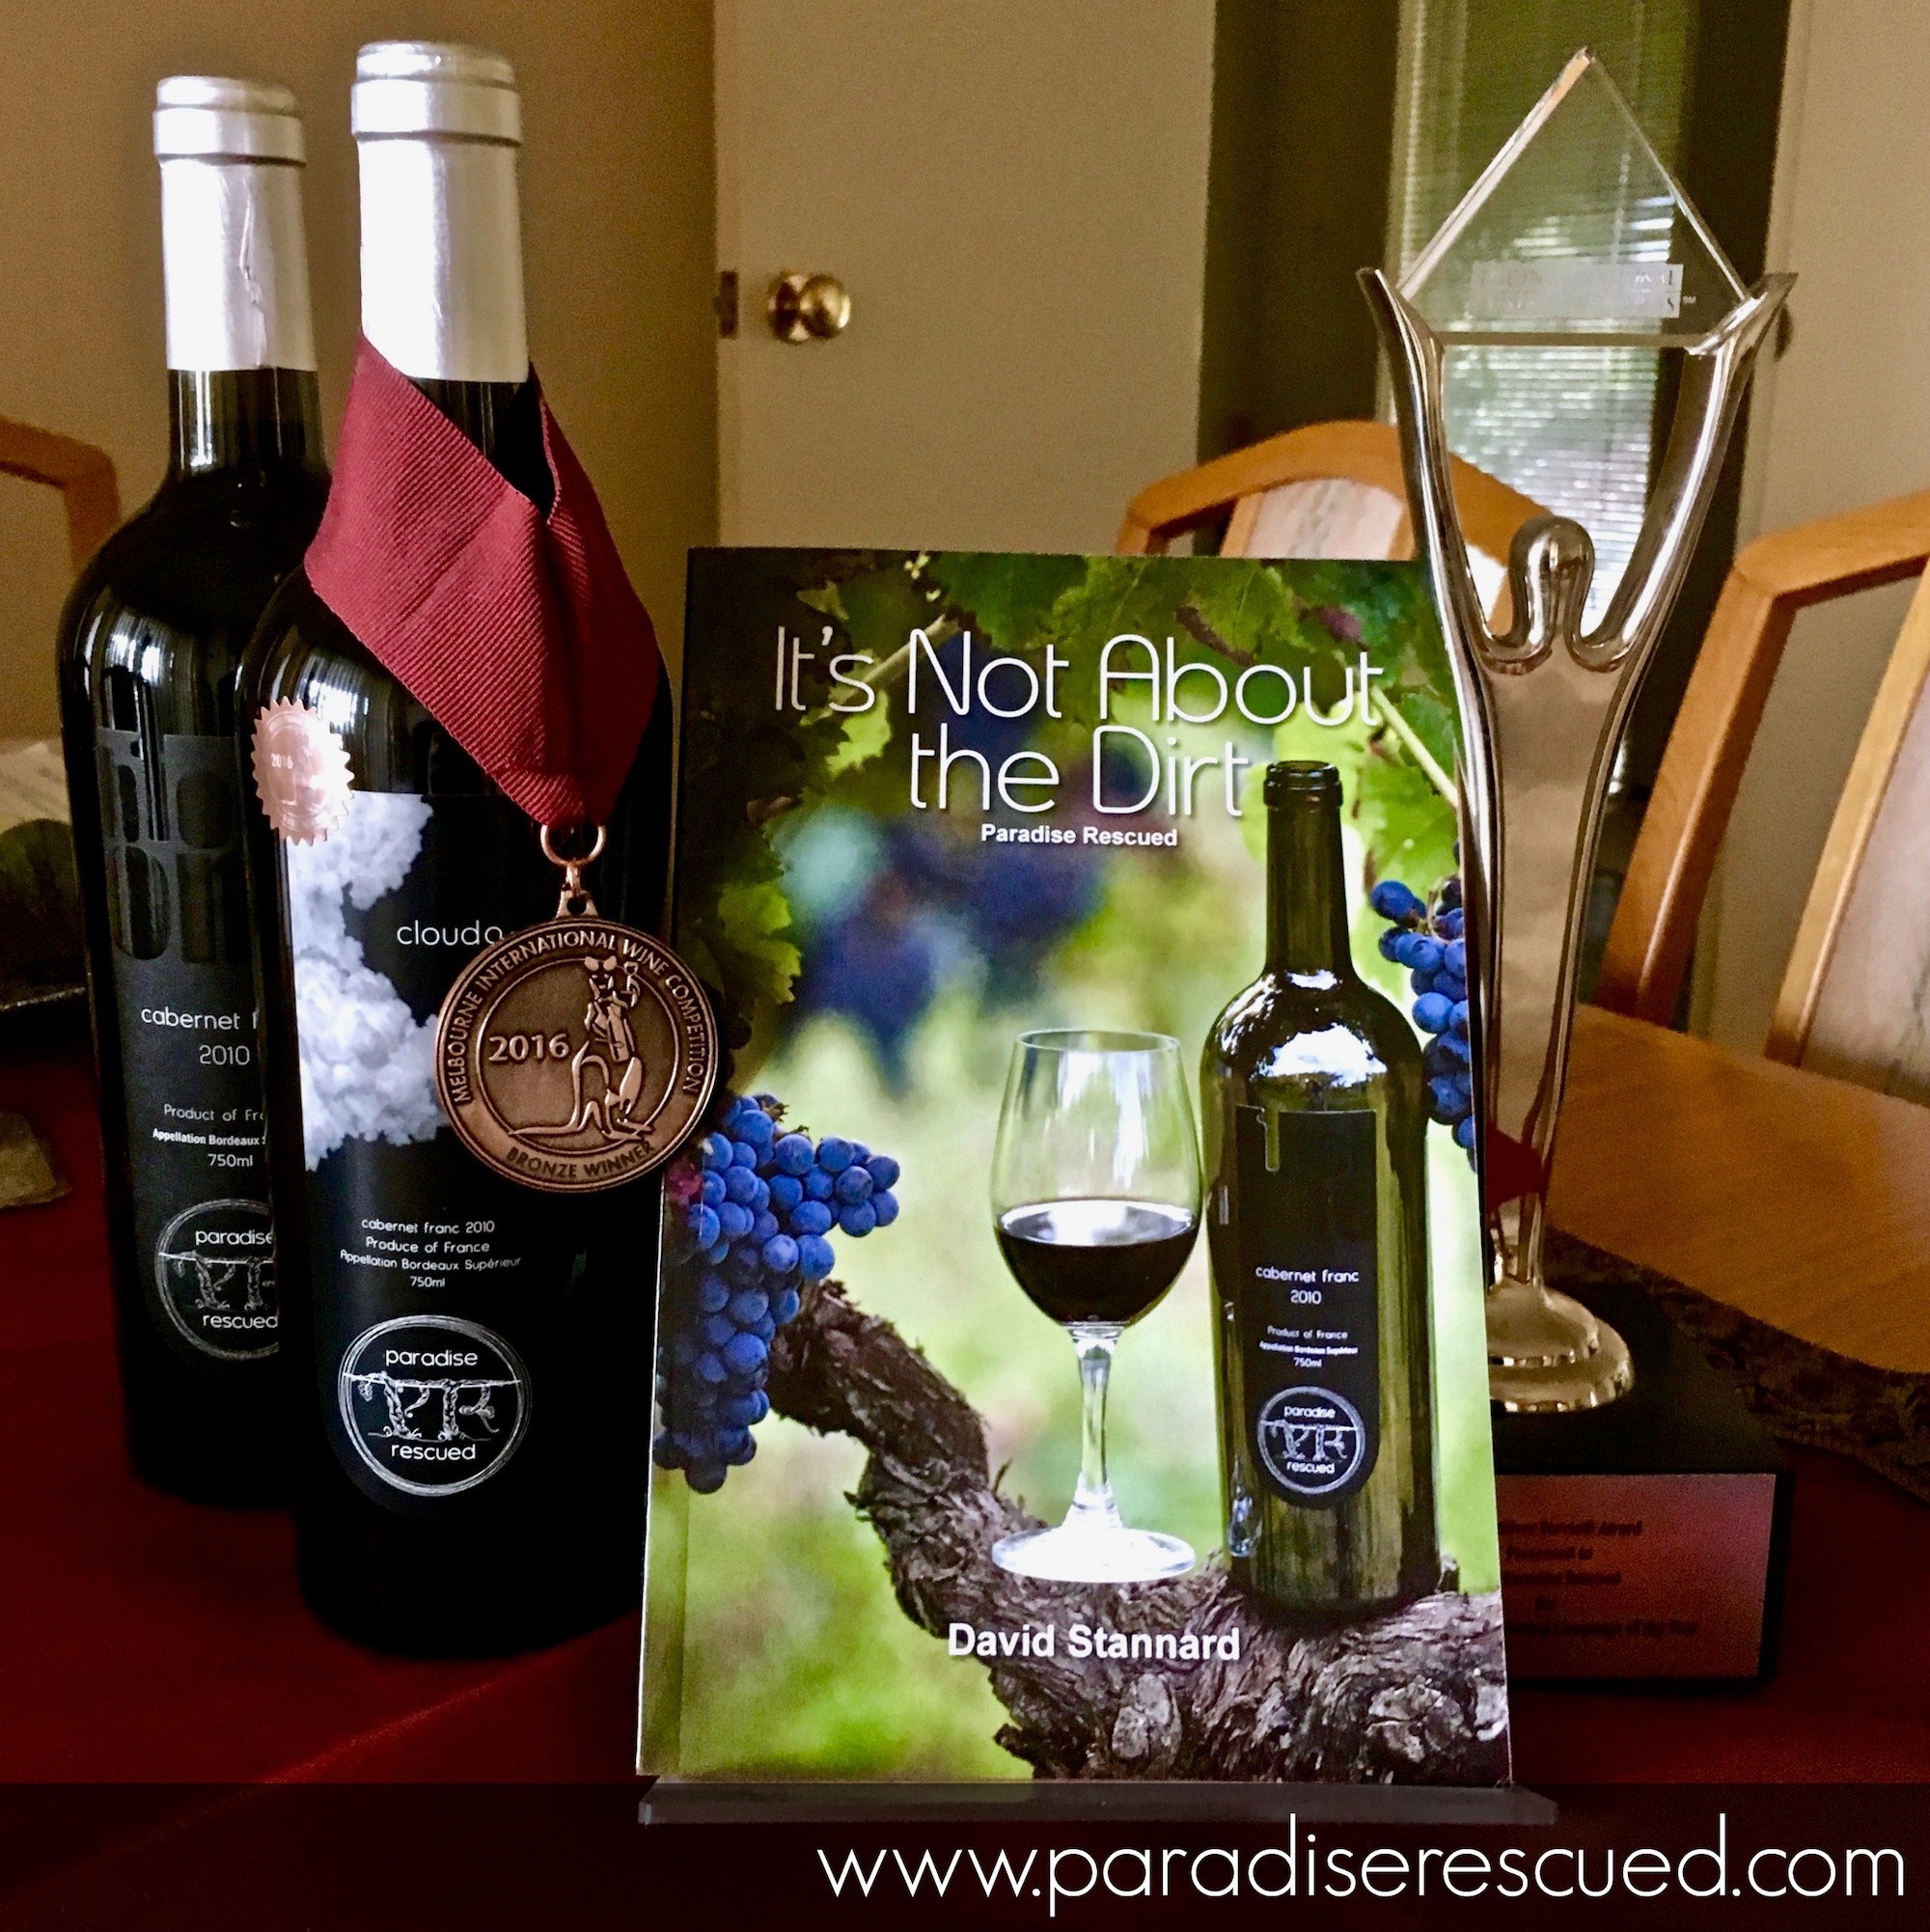 Paradise Rescued book, medal winning wine and international business award.